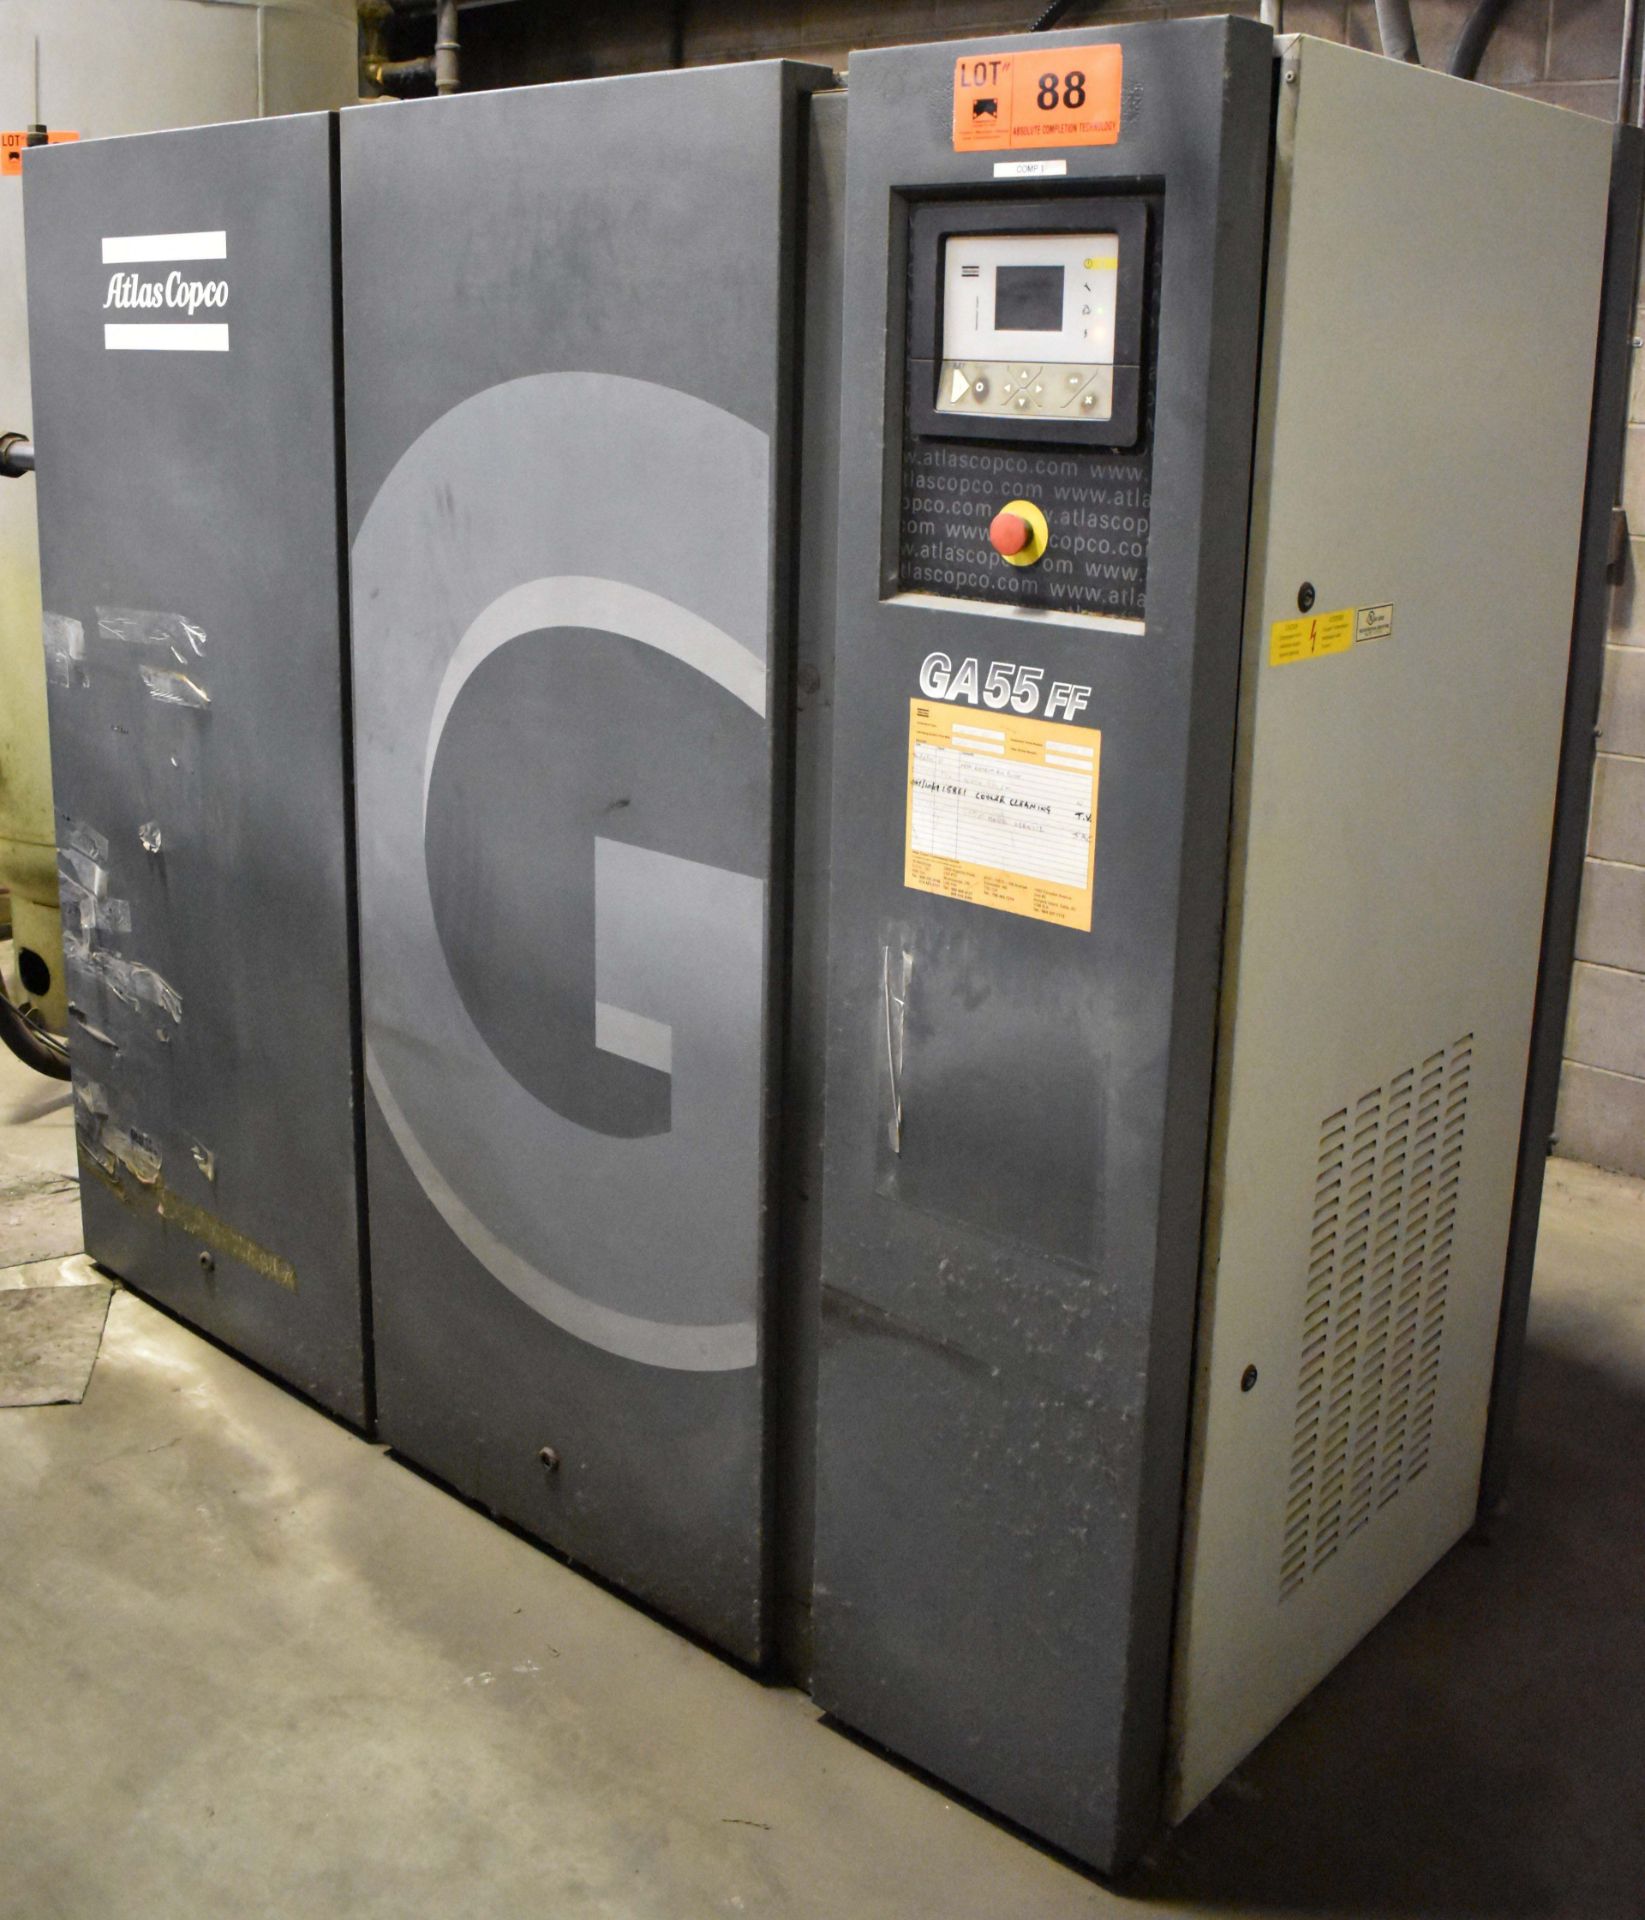 ATLAS COPCO (2011) GA55 FF ROTARY SCREW AIR COMPRESSOR WITH 75 HP, 33,641 RUNNING HRS, 8005 LOADED